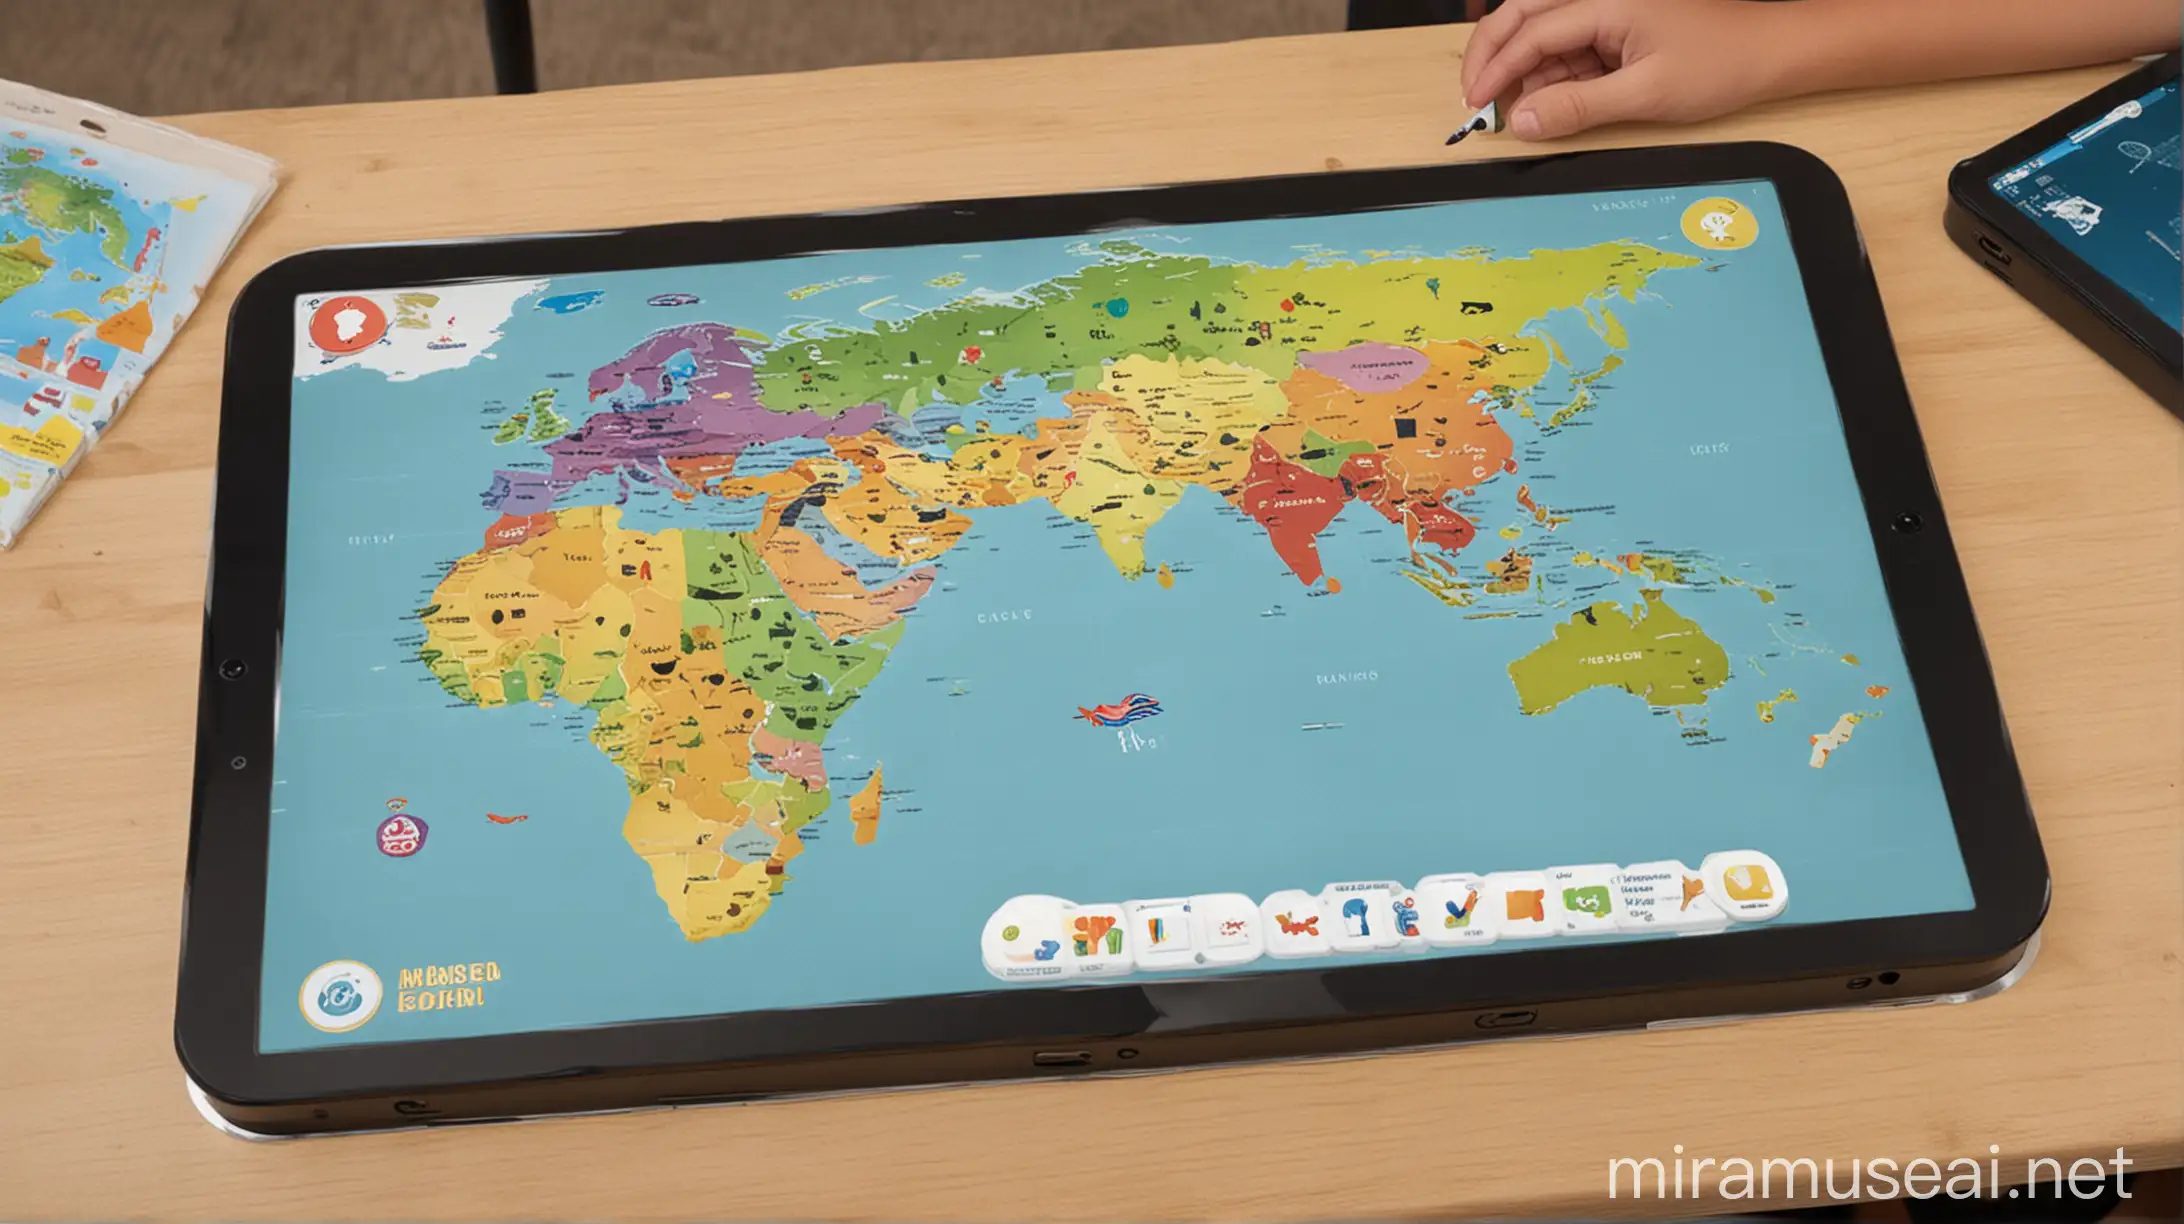 Create an interactive screen for an educational app on a sensor table, where children can study the world map. The screen should have a map with highlighted continents and a 'Learn More' button to get information about each country. Use bright colors and attractive images of attractions.